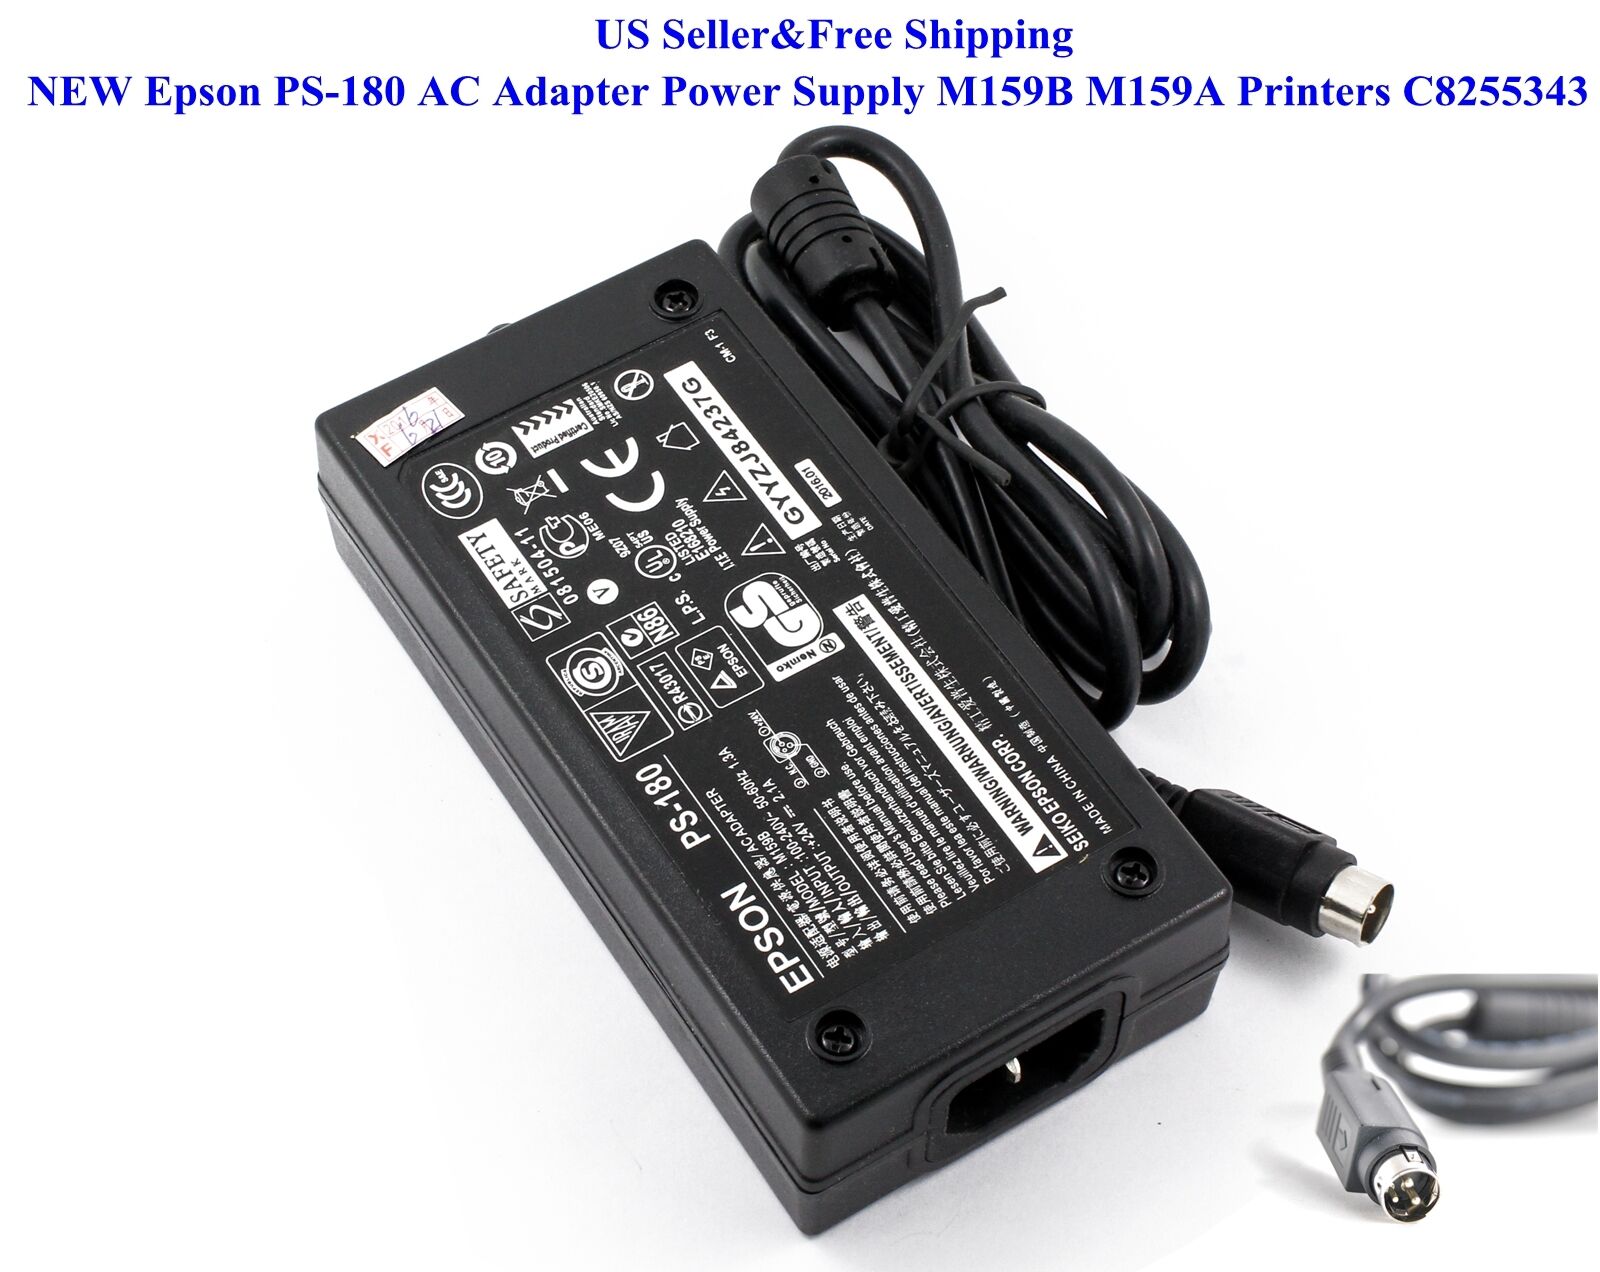 NEW Epson PS-180 AC Adapter Power Supply M159B M159A Printers C8255343 US Compatible Brand: For Epson Type: PS-180 A